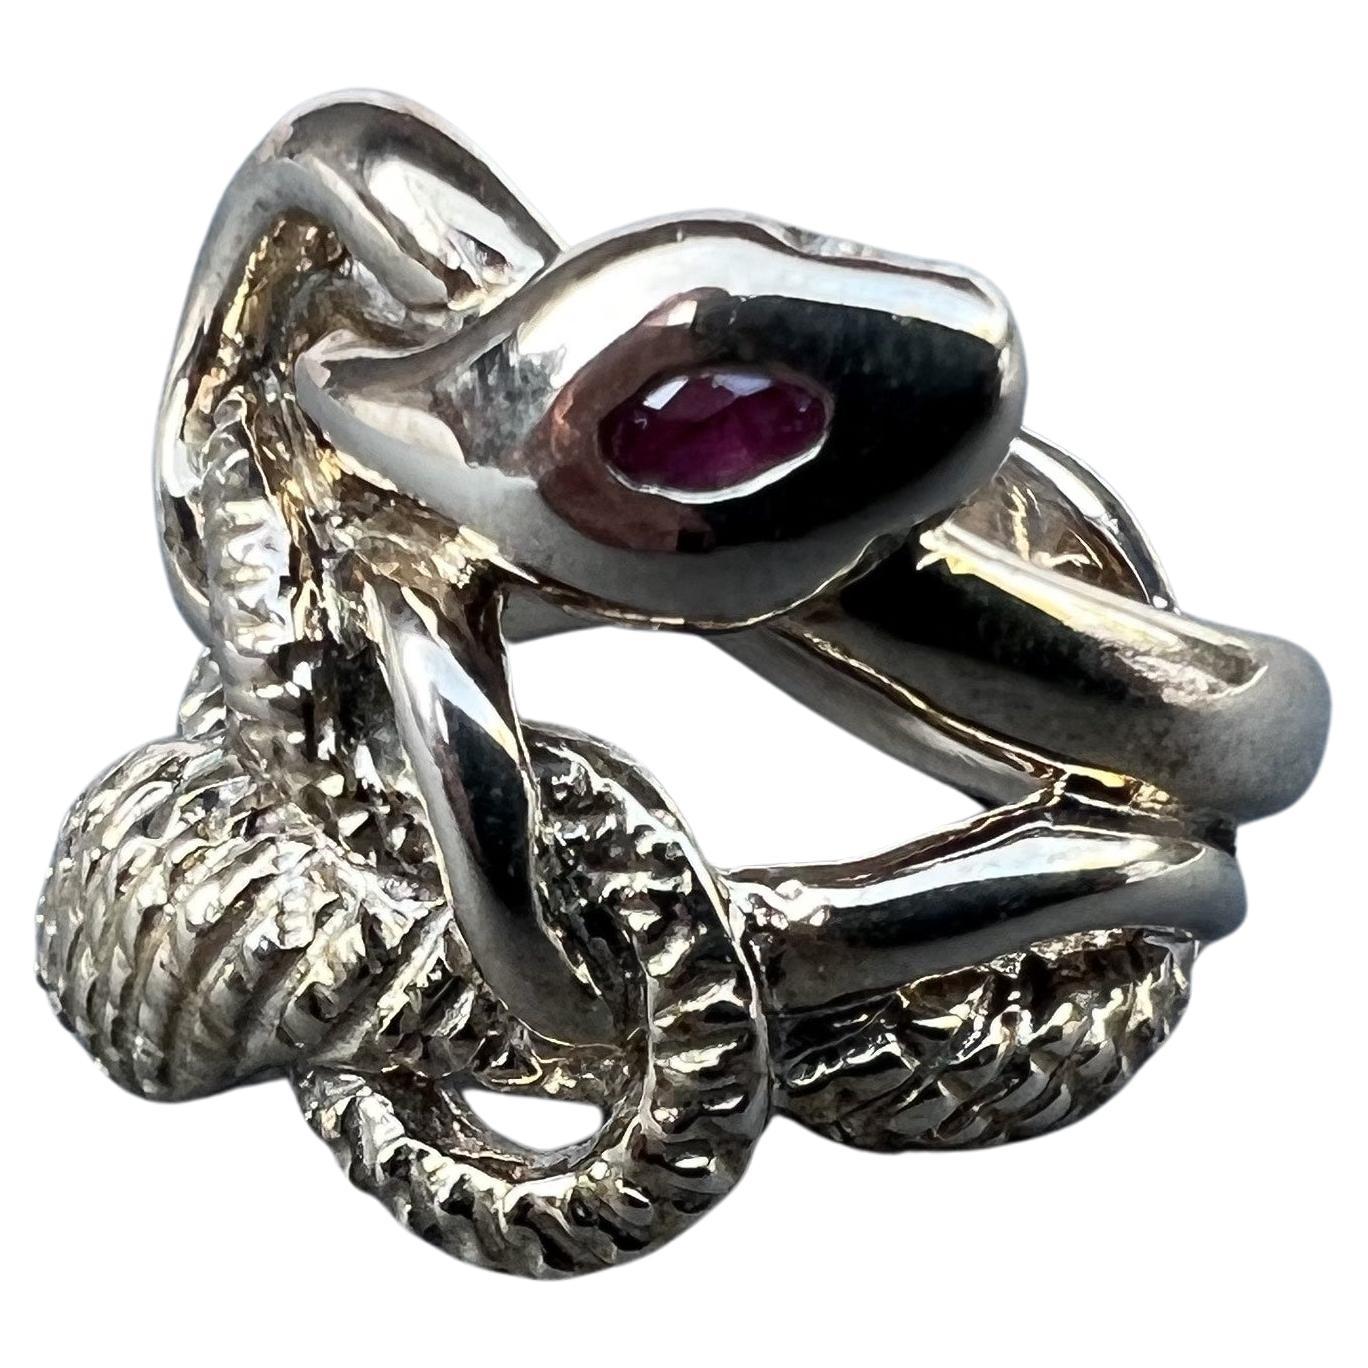 Animal Jewelry Ruby Marquis White Diamond Emerald 14k Gold Snake Ring Cocktail Ring J Dauphin
Style: Cocktail Ring 
Material: 14k Gold
Designer: J Dauphin

J DAUPHIN 

Hand Made in Los Angeles

Made to order - 3-4 weeks to be completed

Last 5